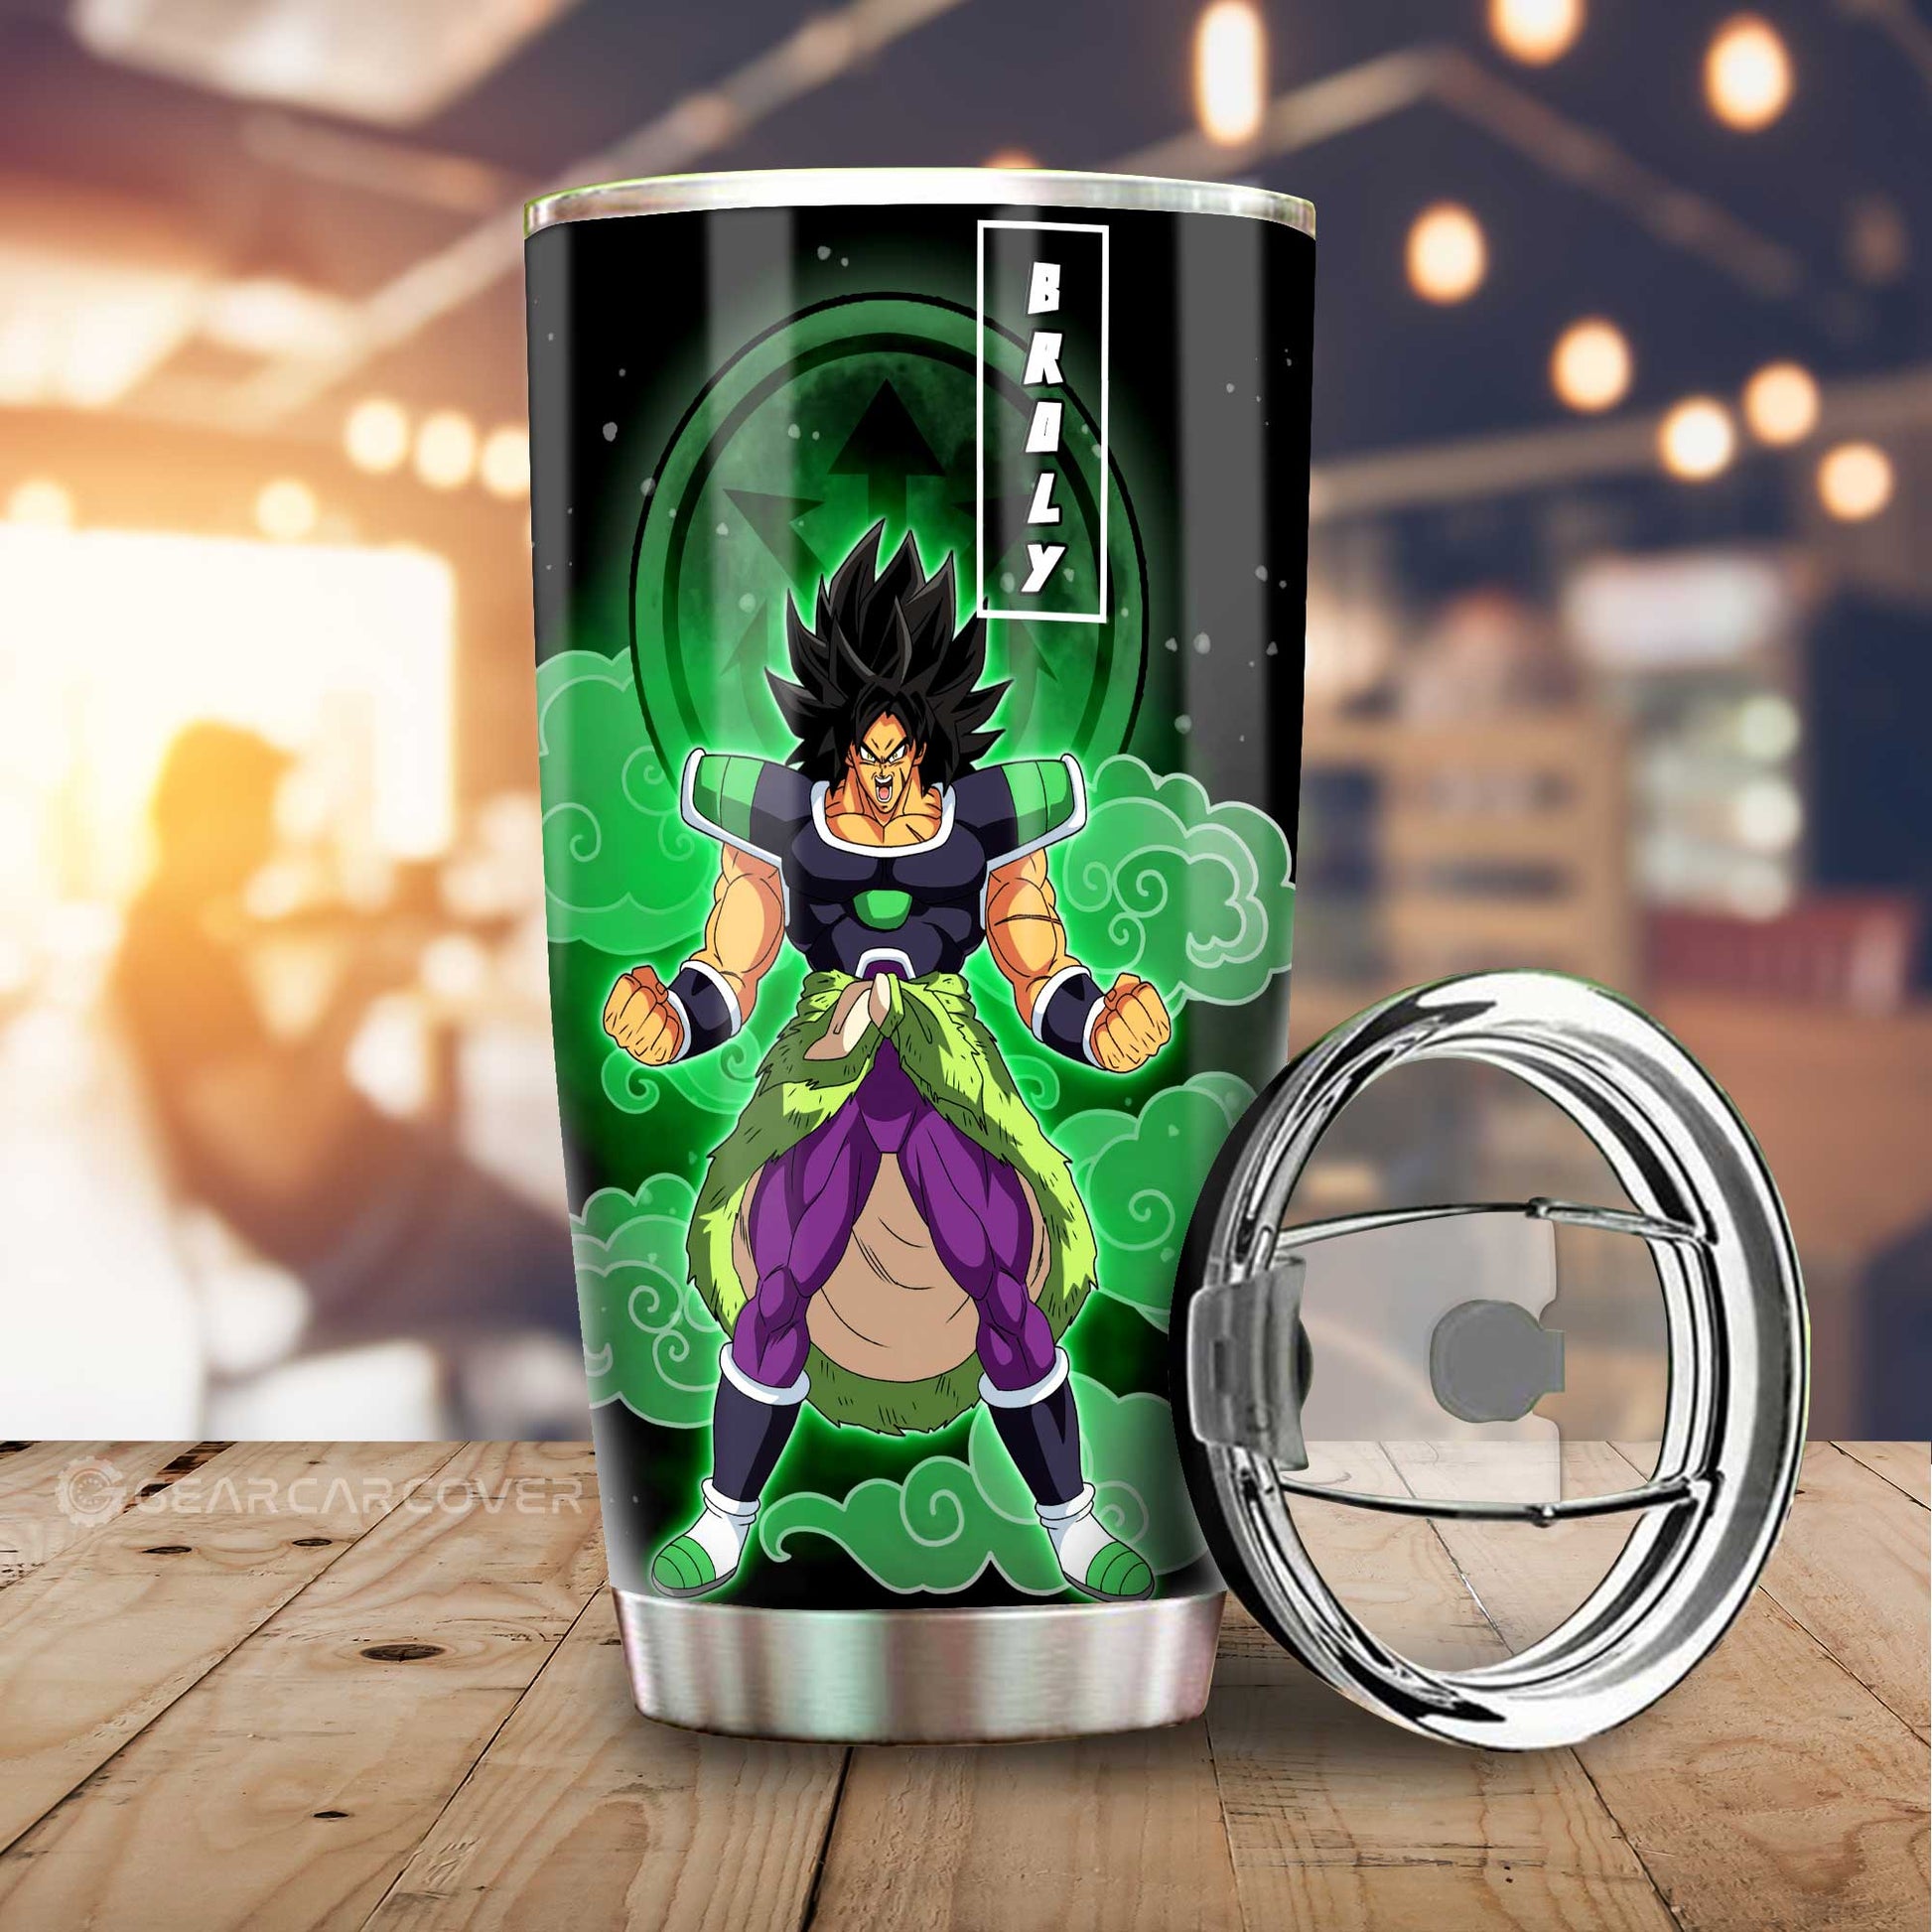 Broly Tumbler Cup Custom Anime Dragon Ball Car Accessories - Gearcarcover - 1